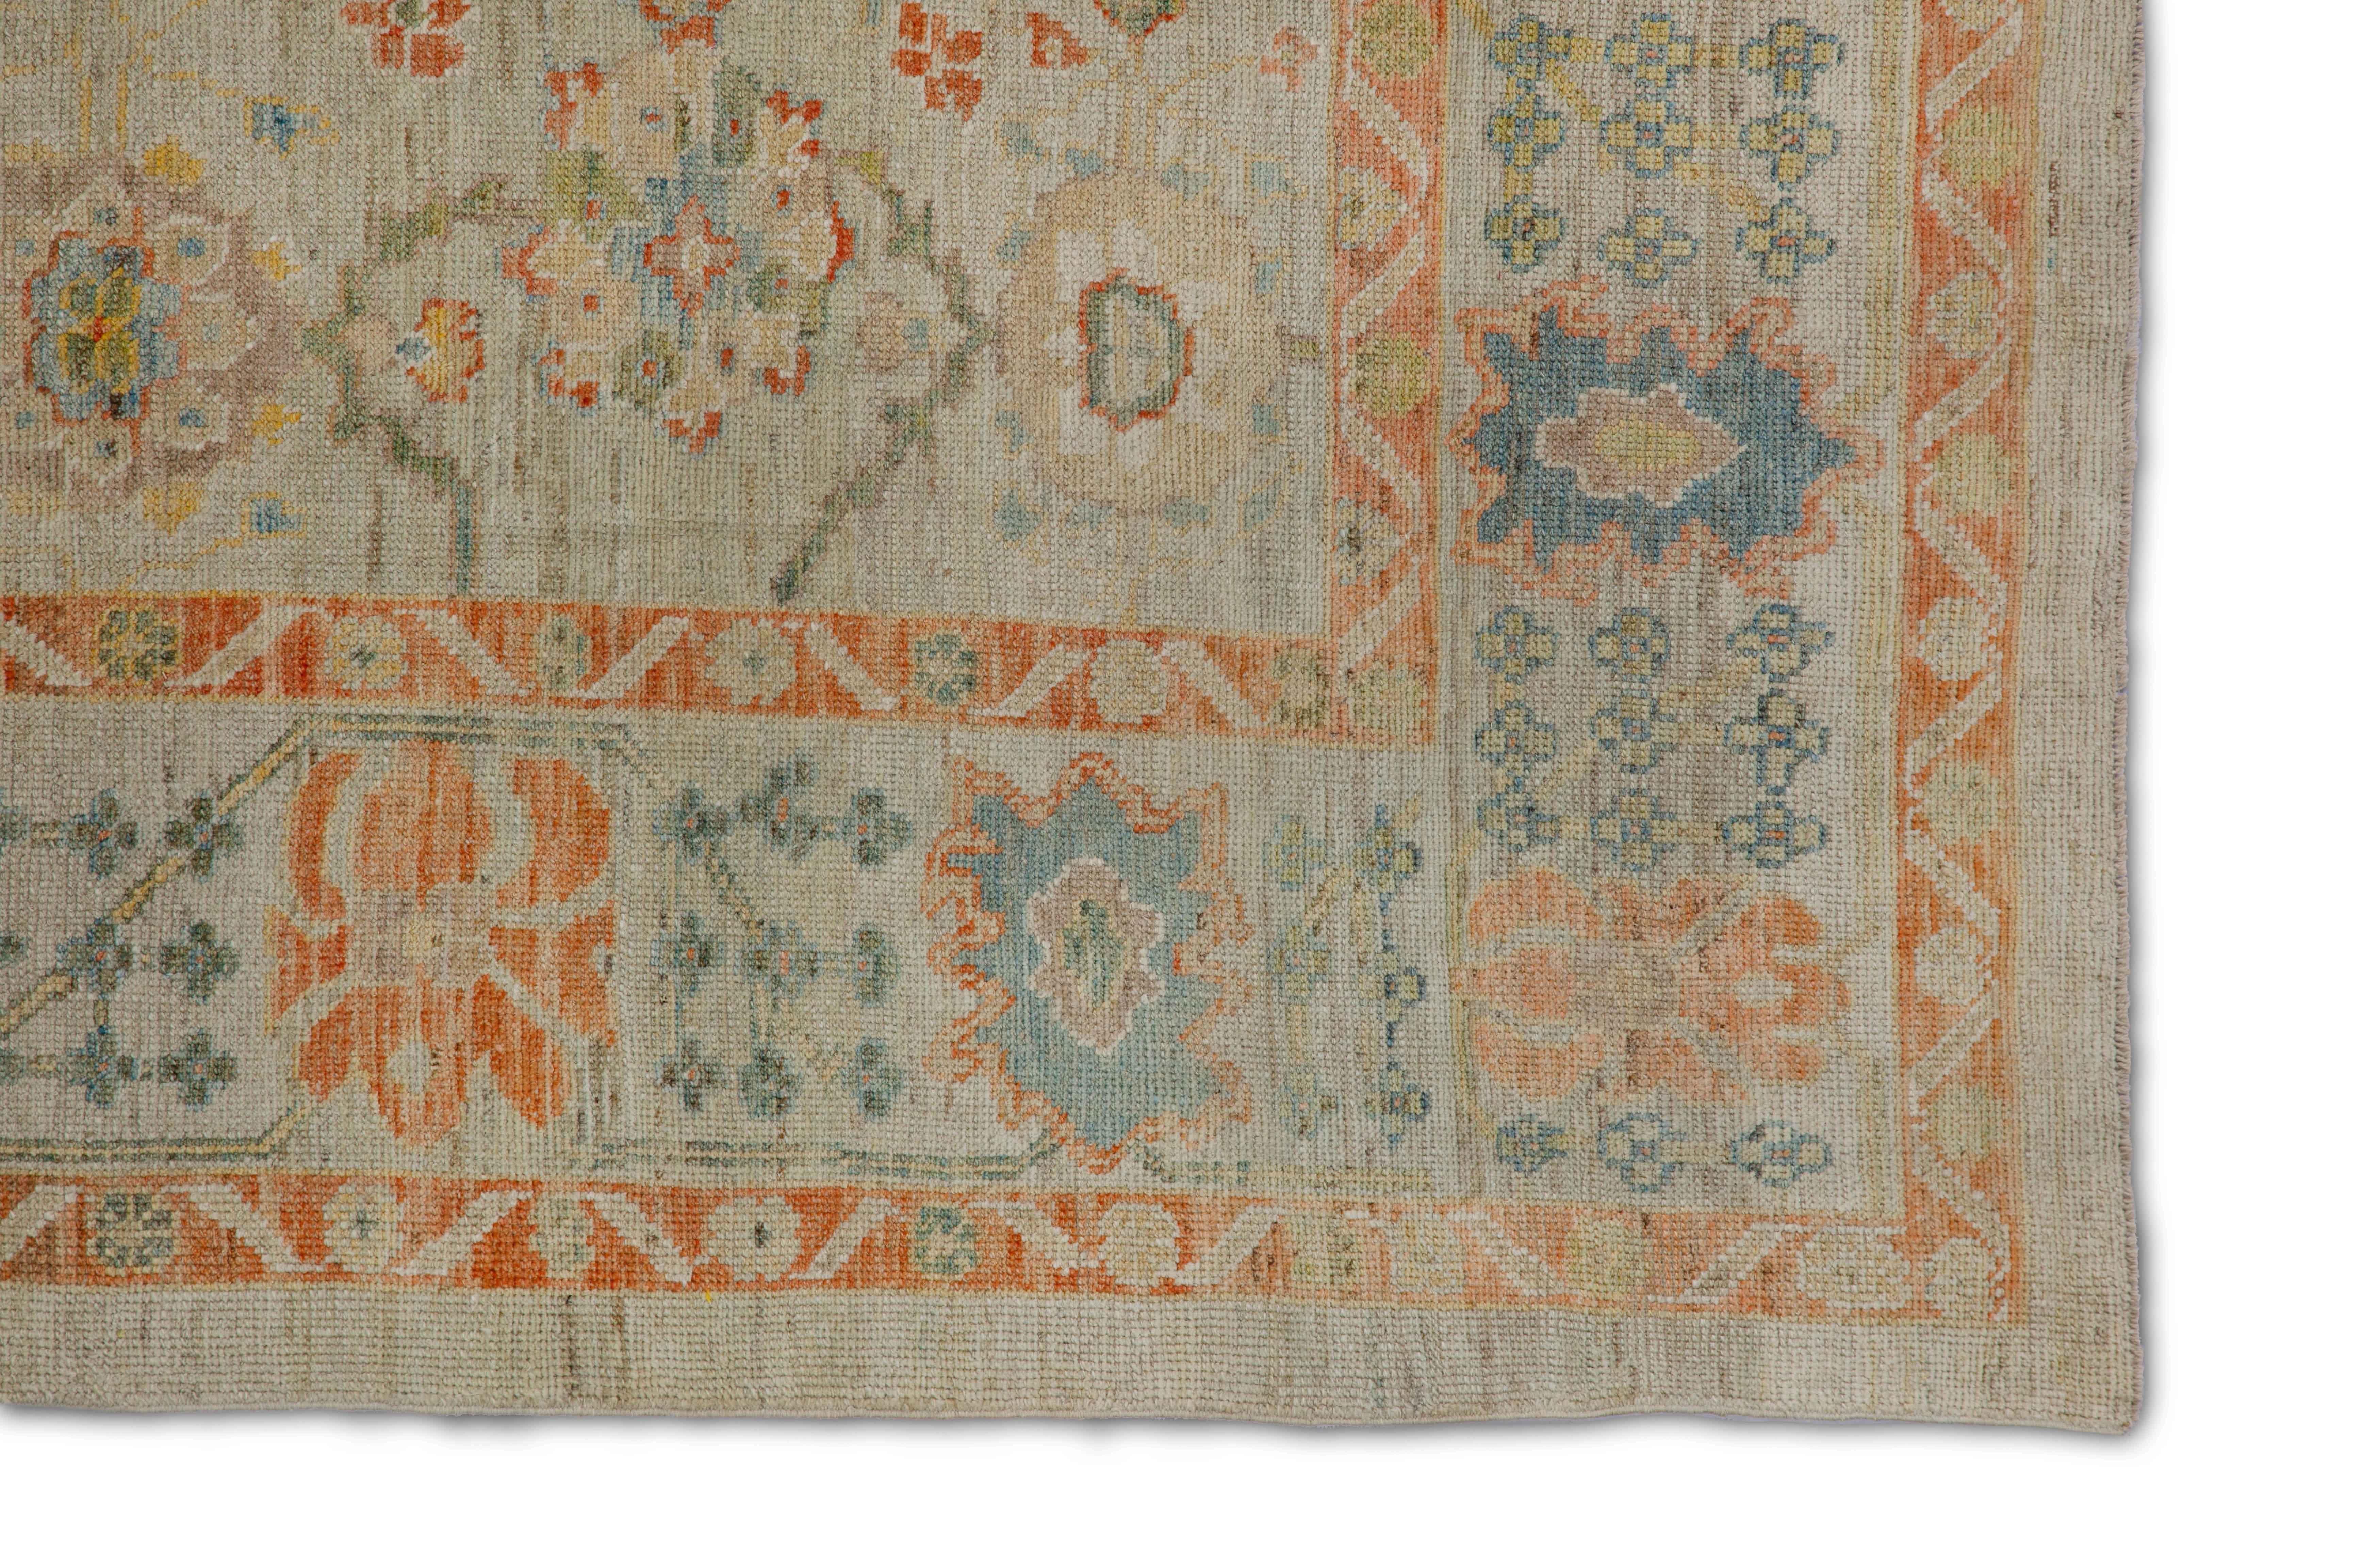 Hand-Woven Modern Turkish Oushak Rug with Ornate Blue and Orange Flower Patterns For Sale